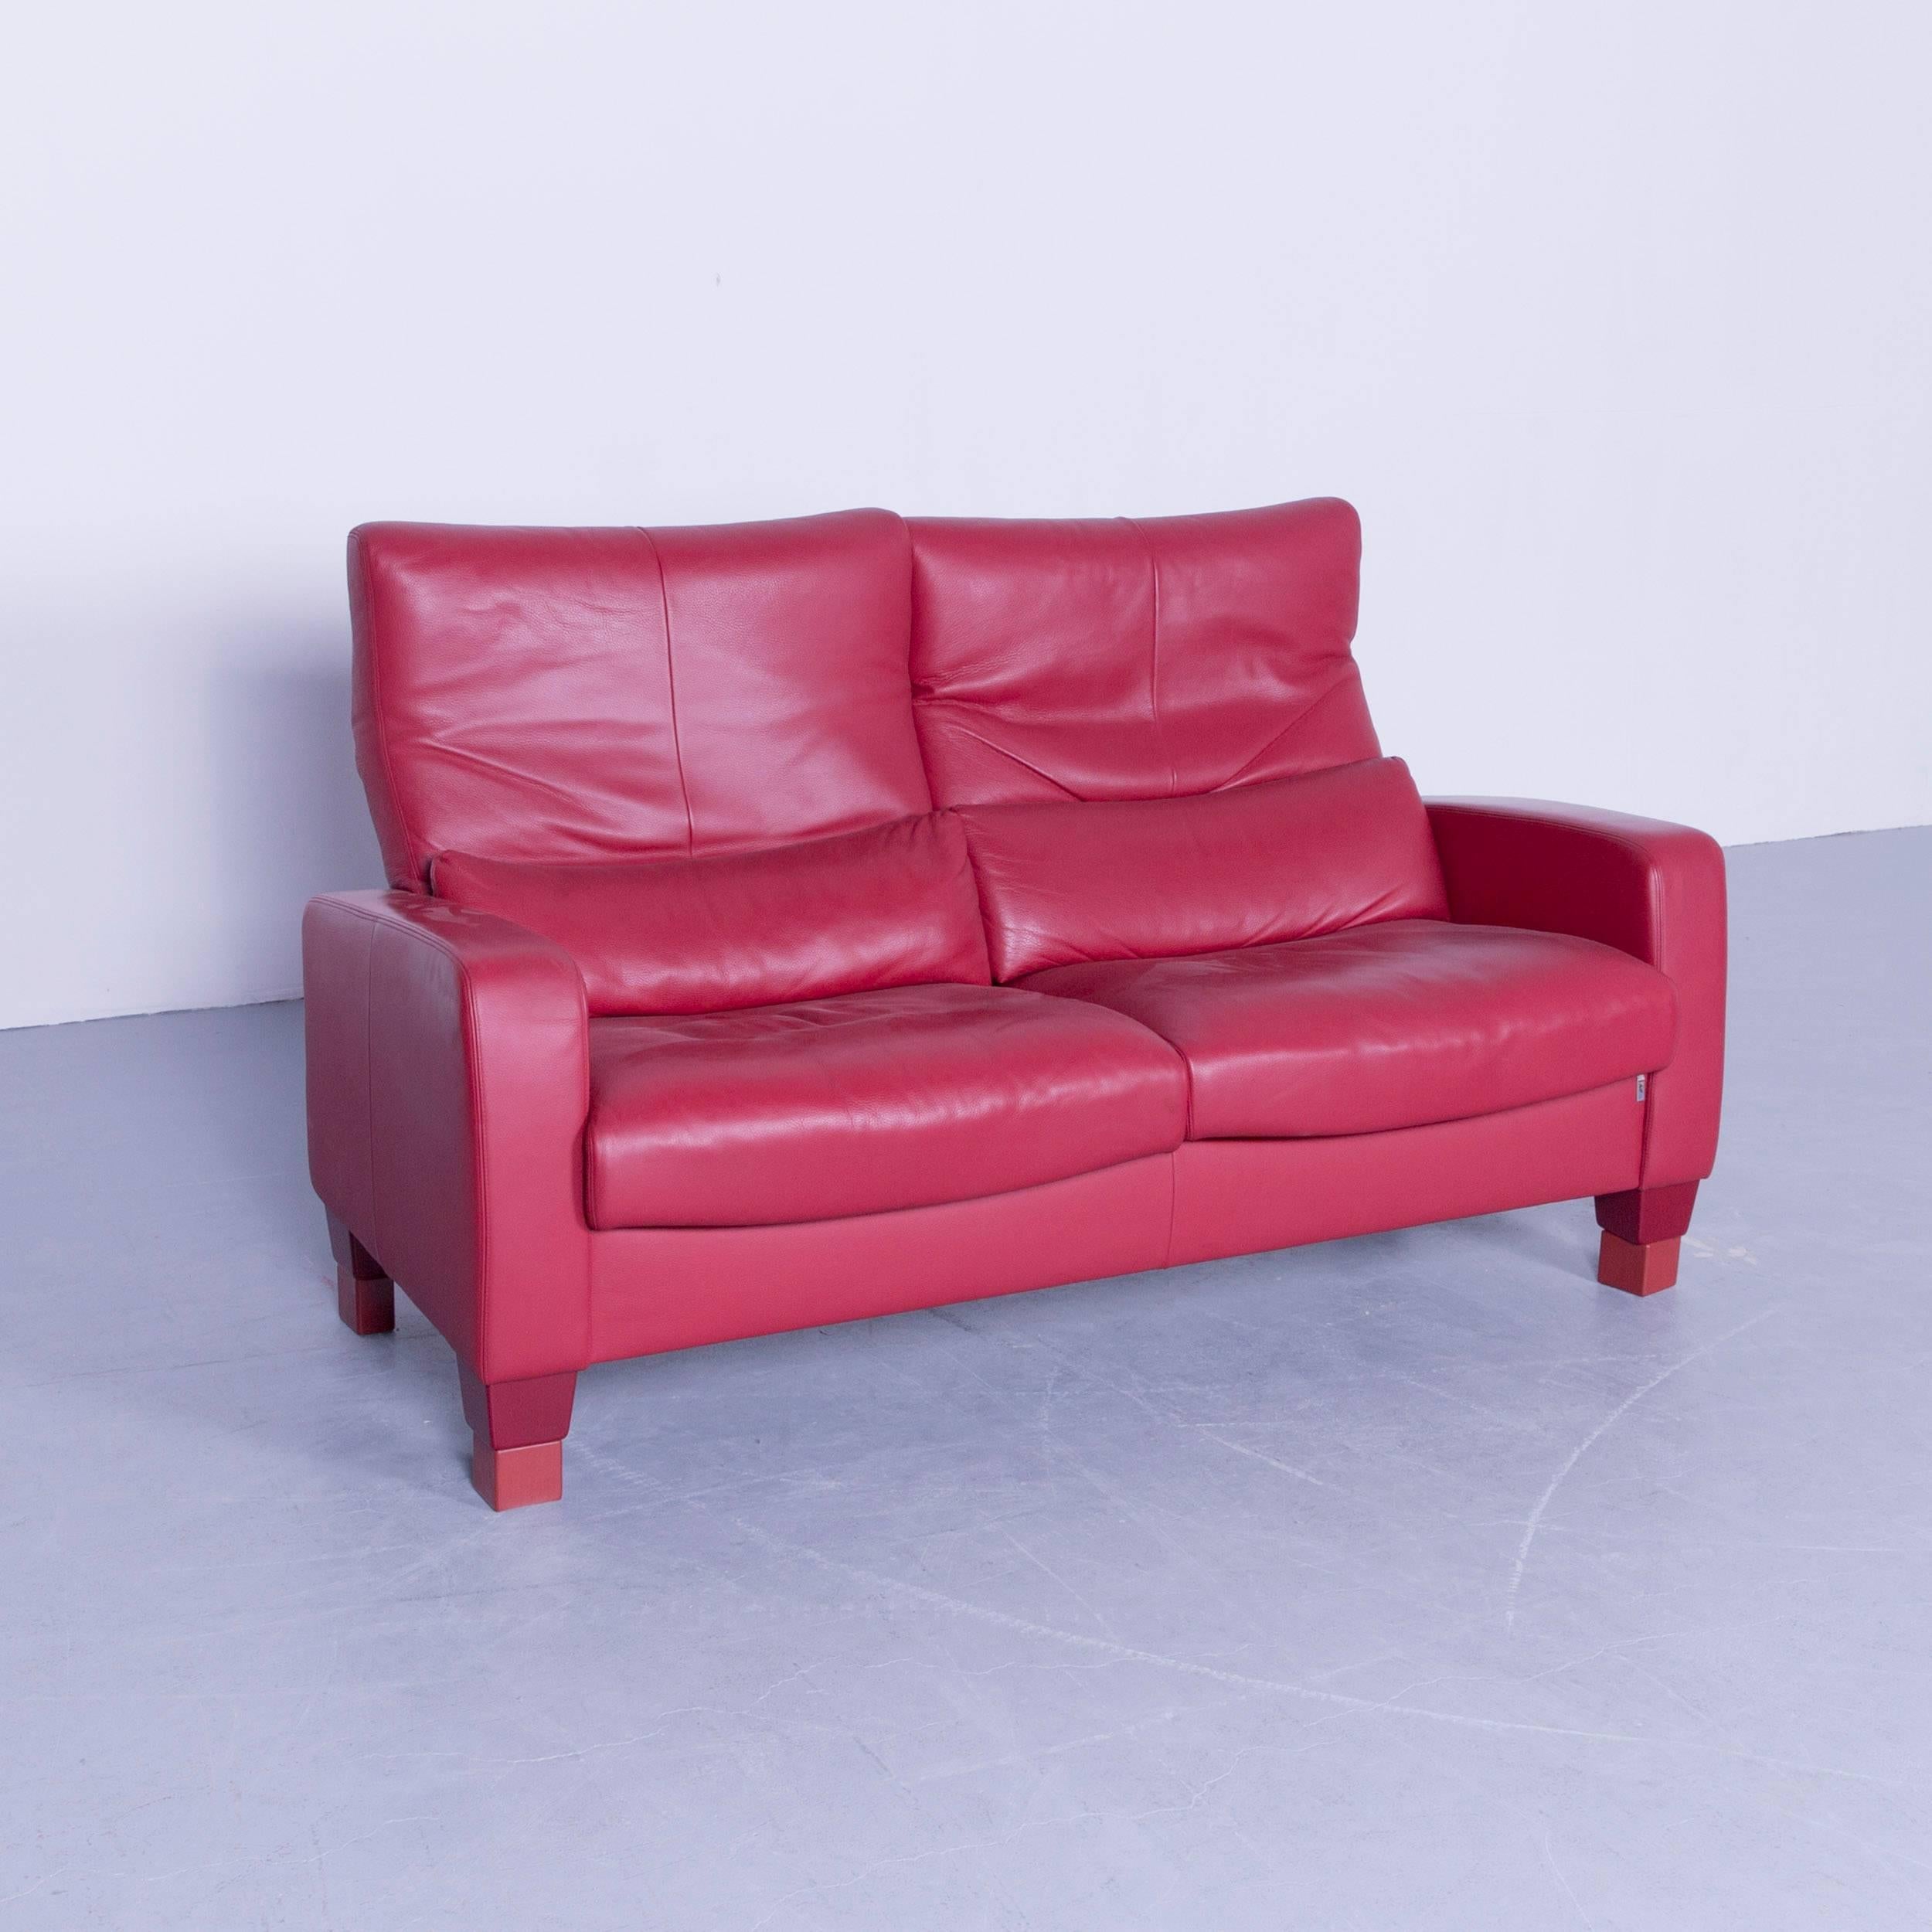 Contemporary Erpo Designer Sofa Set Leather Red Two-Seat and Armchair Couch Recline Function